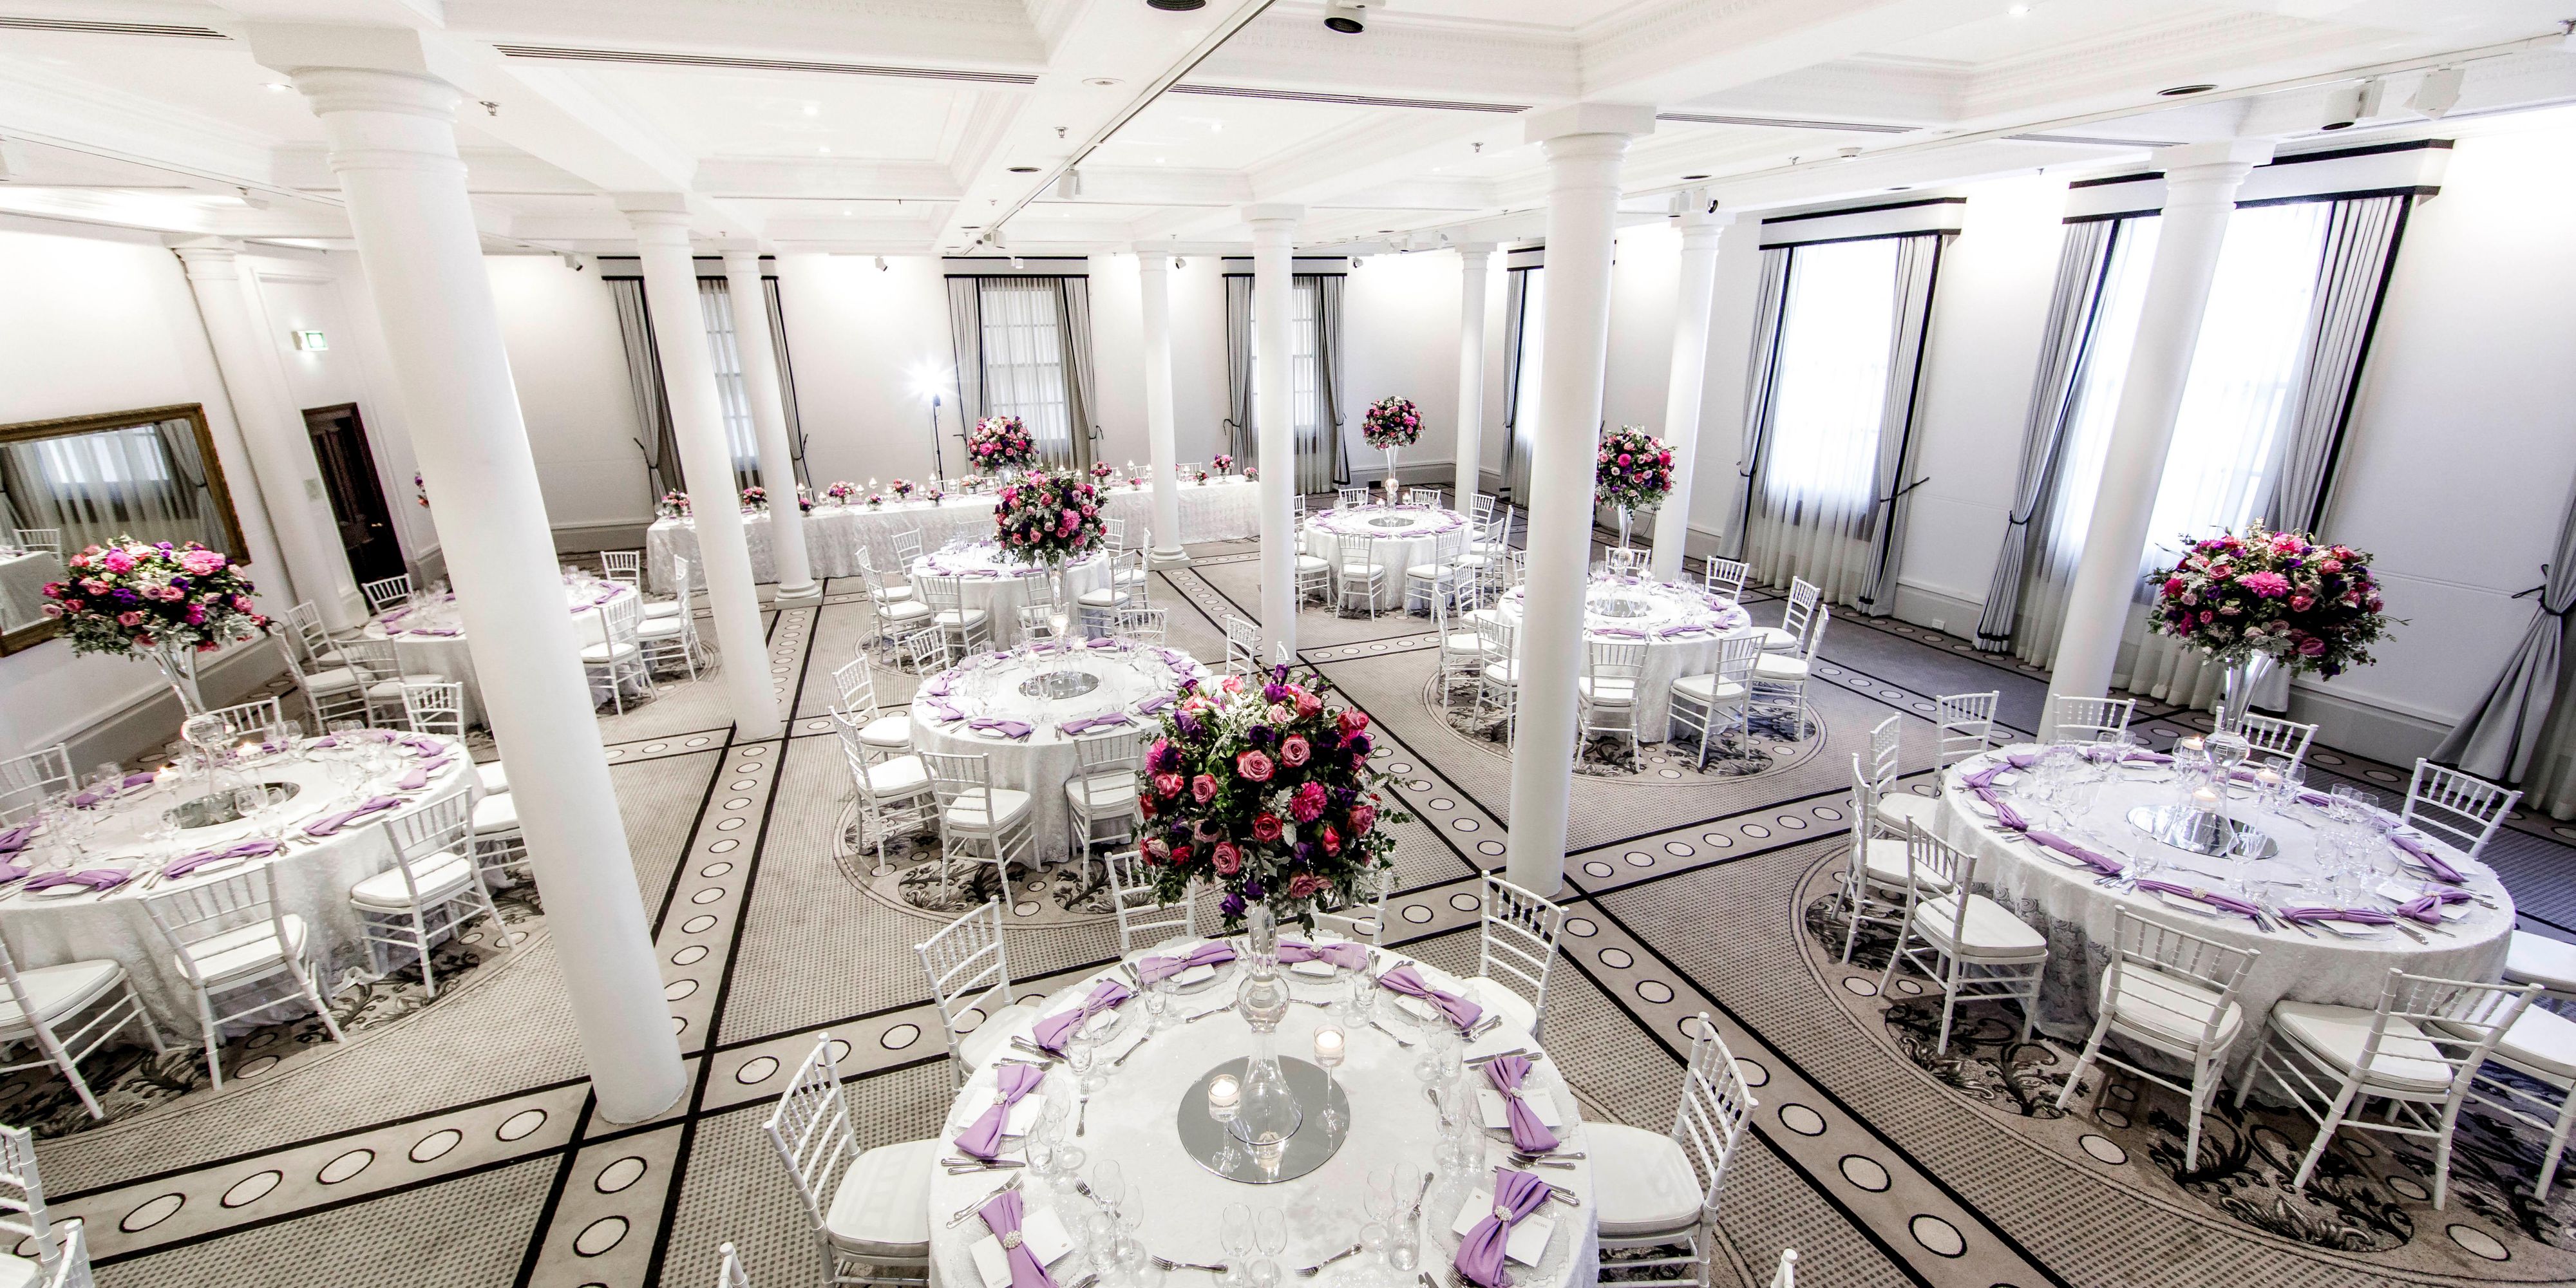 Imbued with timeless elegance and historic magnificence, InterContinental Sydney is an iconic destination to host a memorable occasion. With complete flexibility to be personalised to your unique style, let cherished moments unfold as you mark milestone moments.